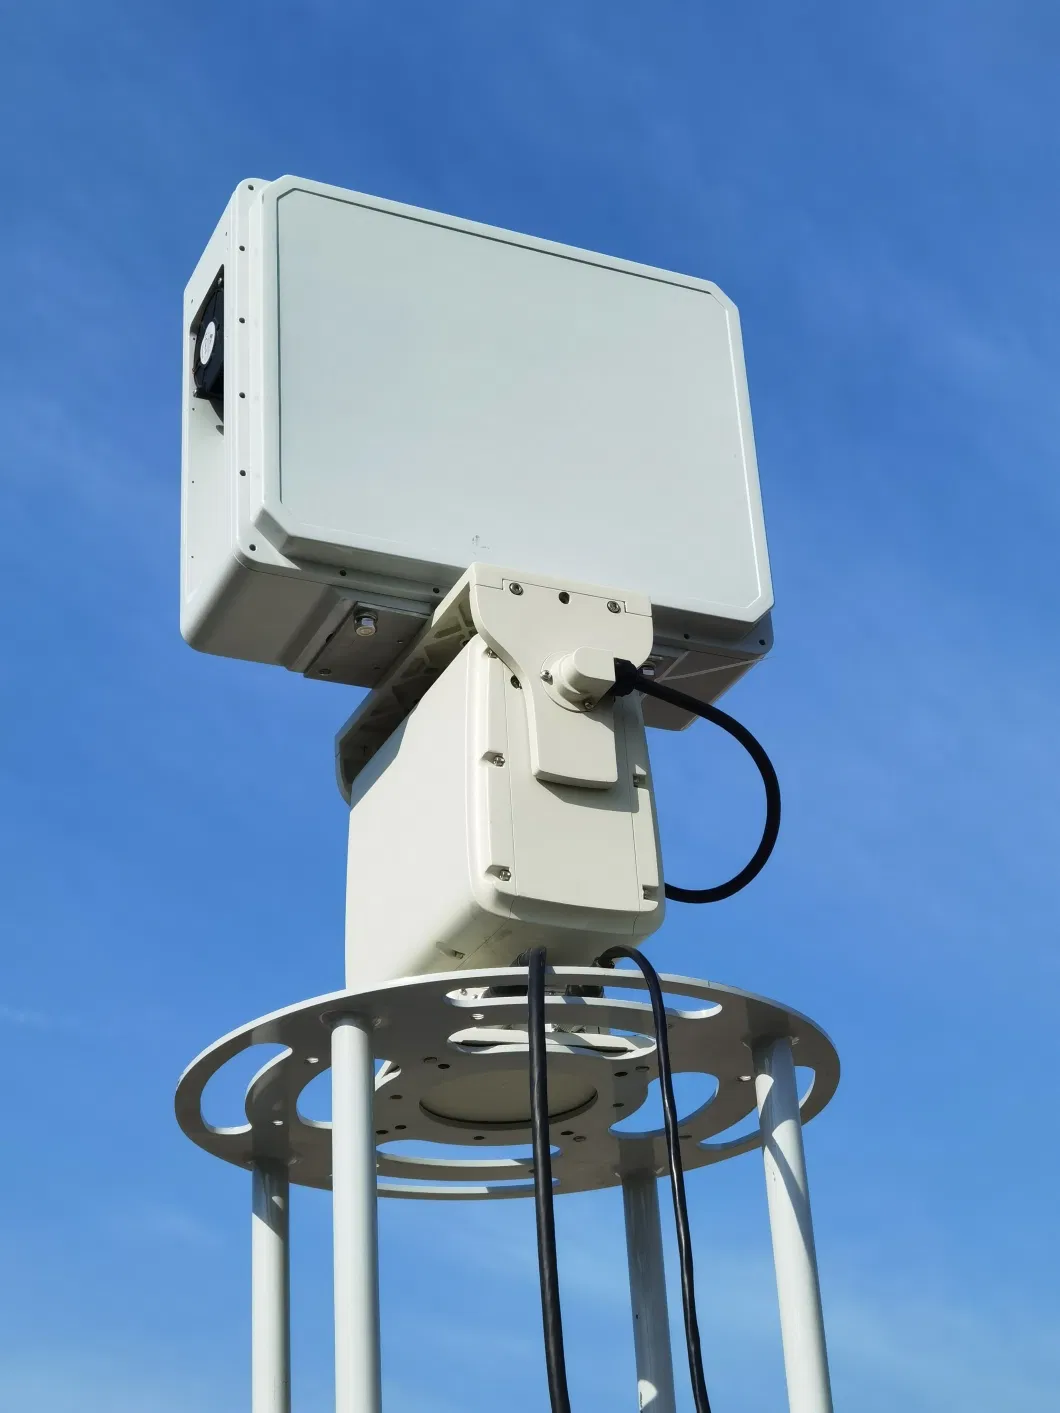 Early Waring Perimeter Surveillance Radar Designed for Detection and Tracking of Fast and Slowly Moving Objects